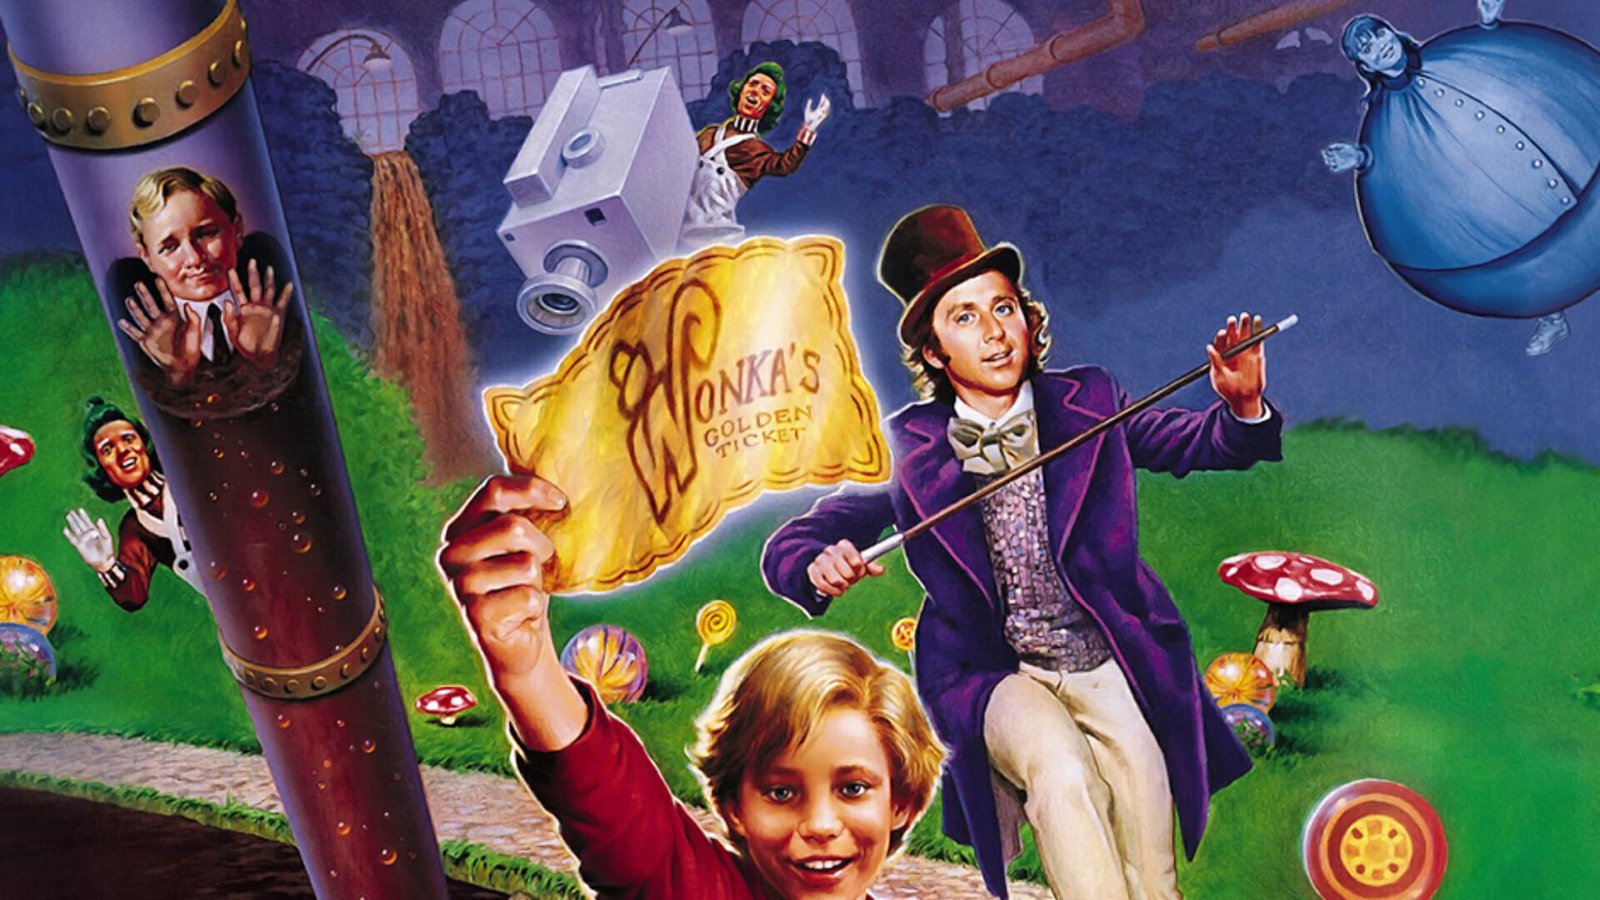 Family Movies on Netflix: Willy Wonka & the Chocolate Factory